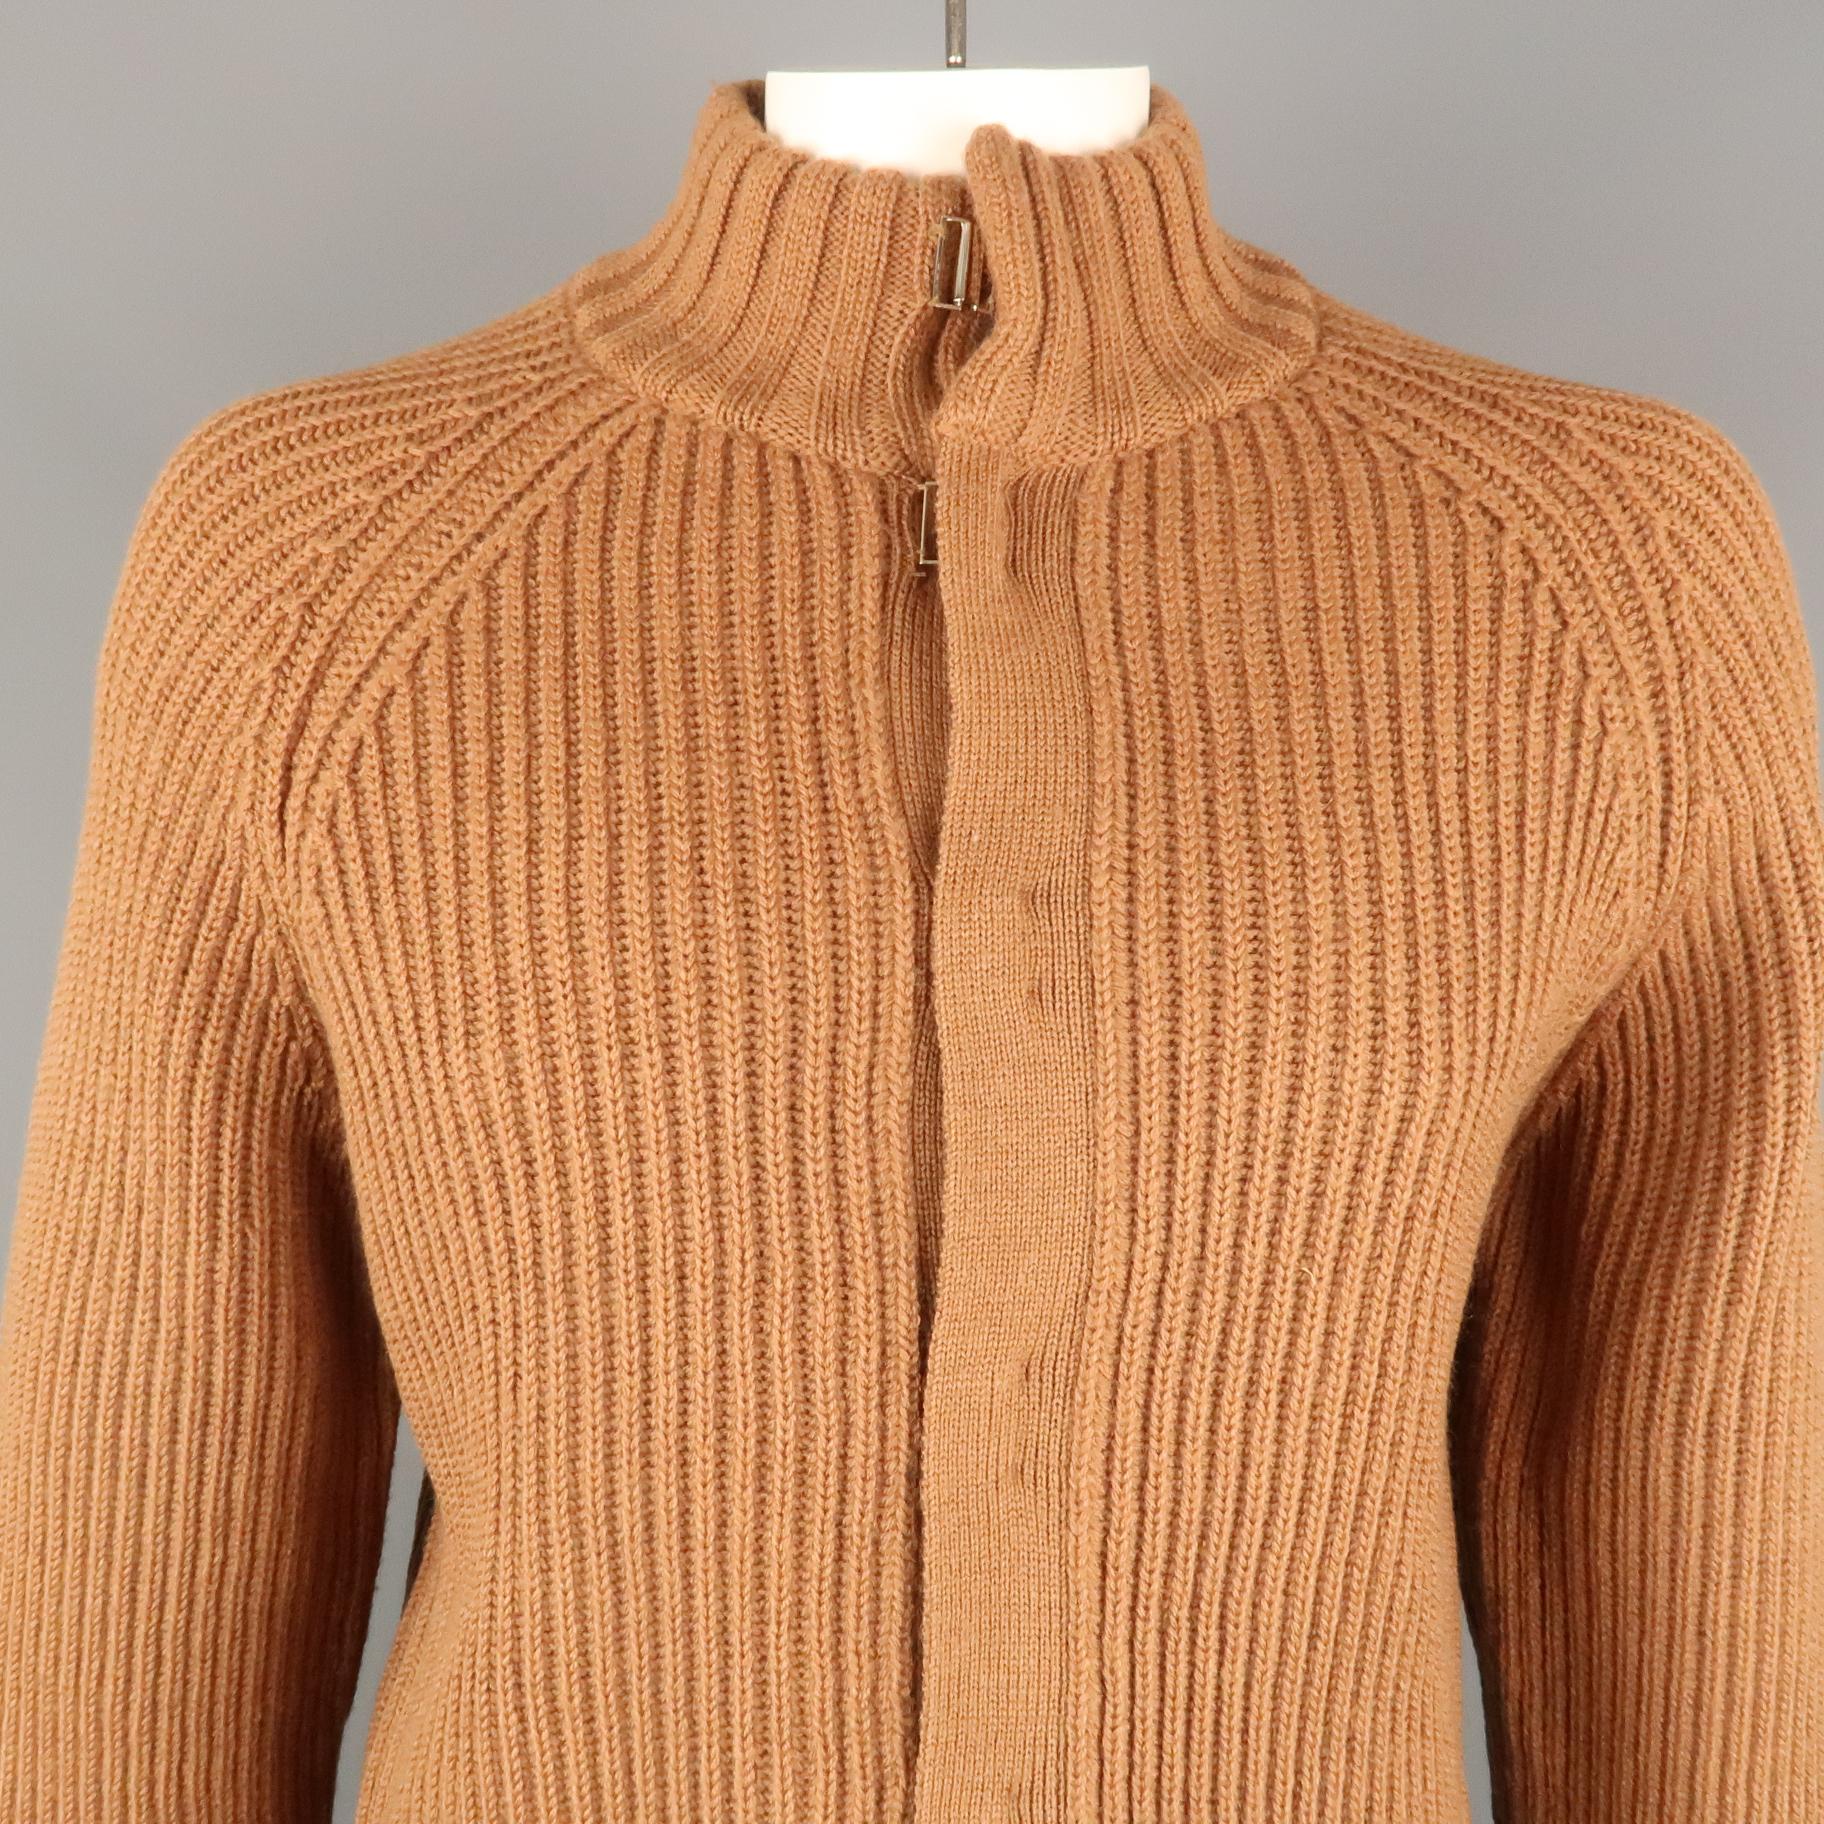 ADOLFO DOMINGUEZ cardigan comes in a brown knitted wool featuring a high collar style and a hook and eye closure.
 
Excellent Pre-Owned Condition.
Marked: 7
 
Measurements:
 
Shoulder: 17.5 in.
Chest: 46 in.
Sleeve: 31 in.
Length: 30 in.